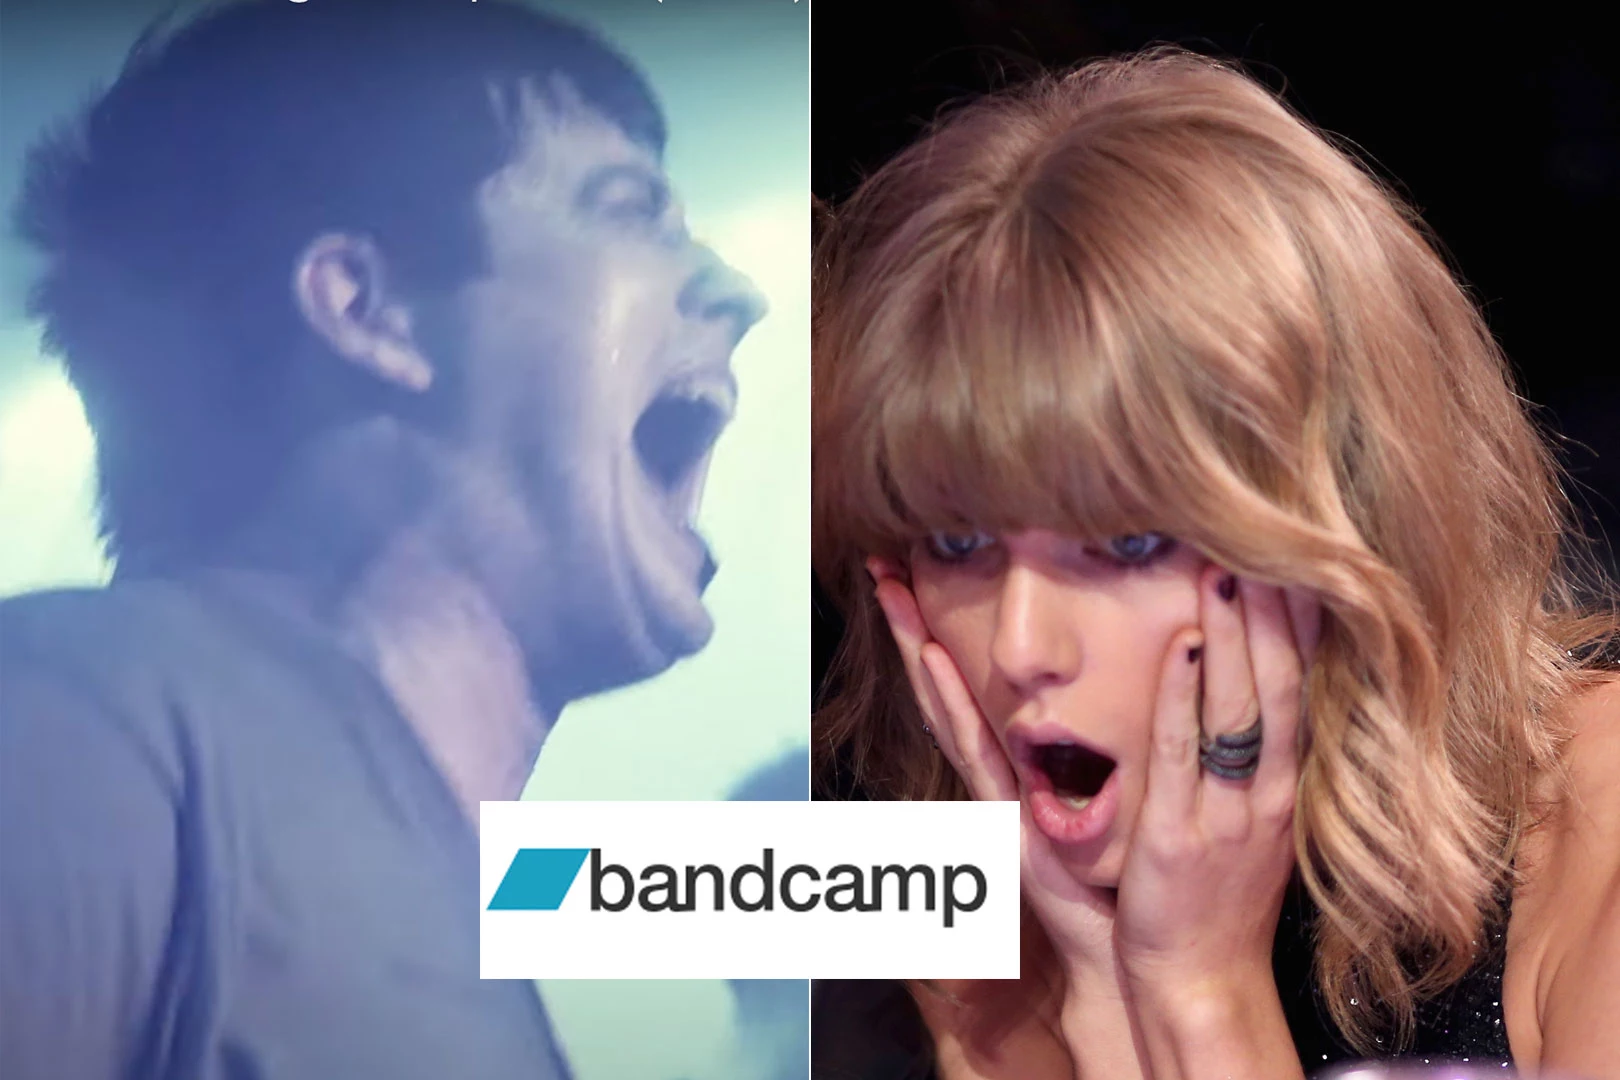 Taylor Swift Bandcamp Page Got Hijacked by a 'Screamo' Musician